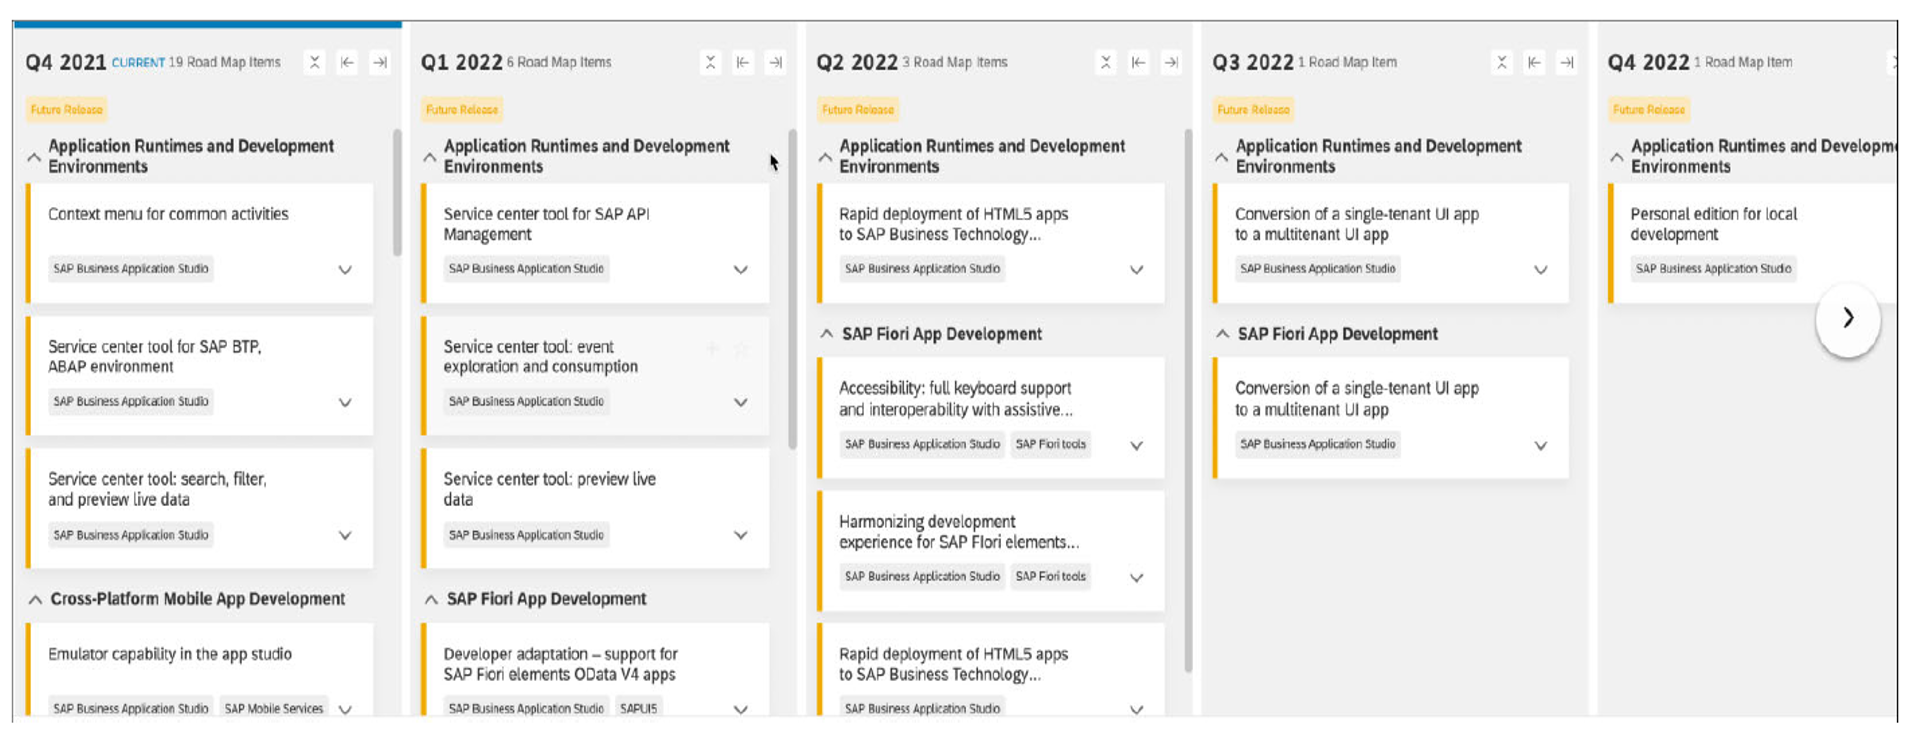 Snapshot of the Feature Release Road Map for SAP Business Application Studio